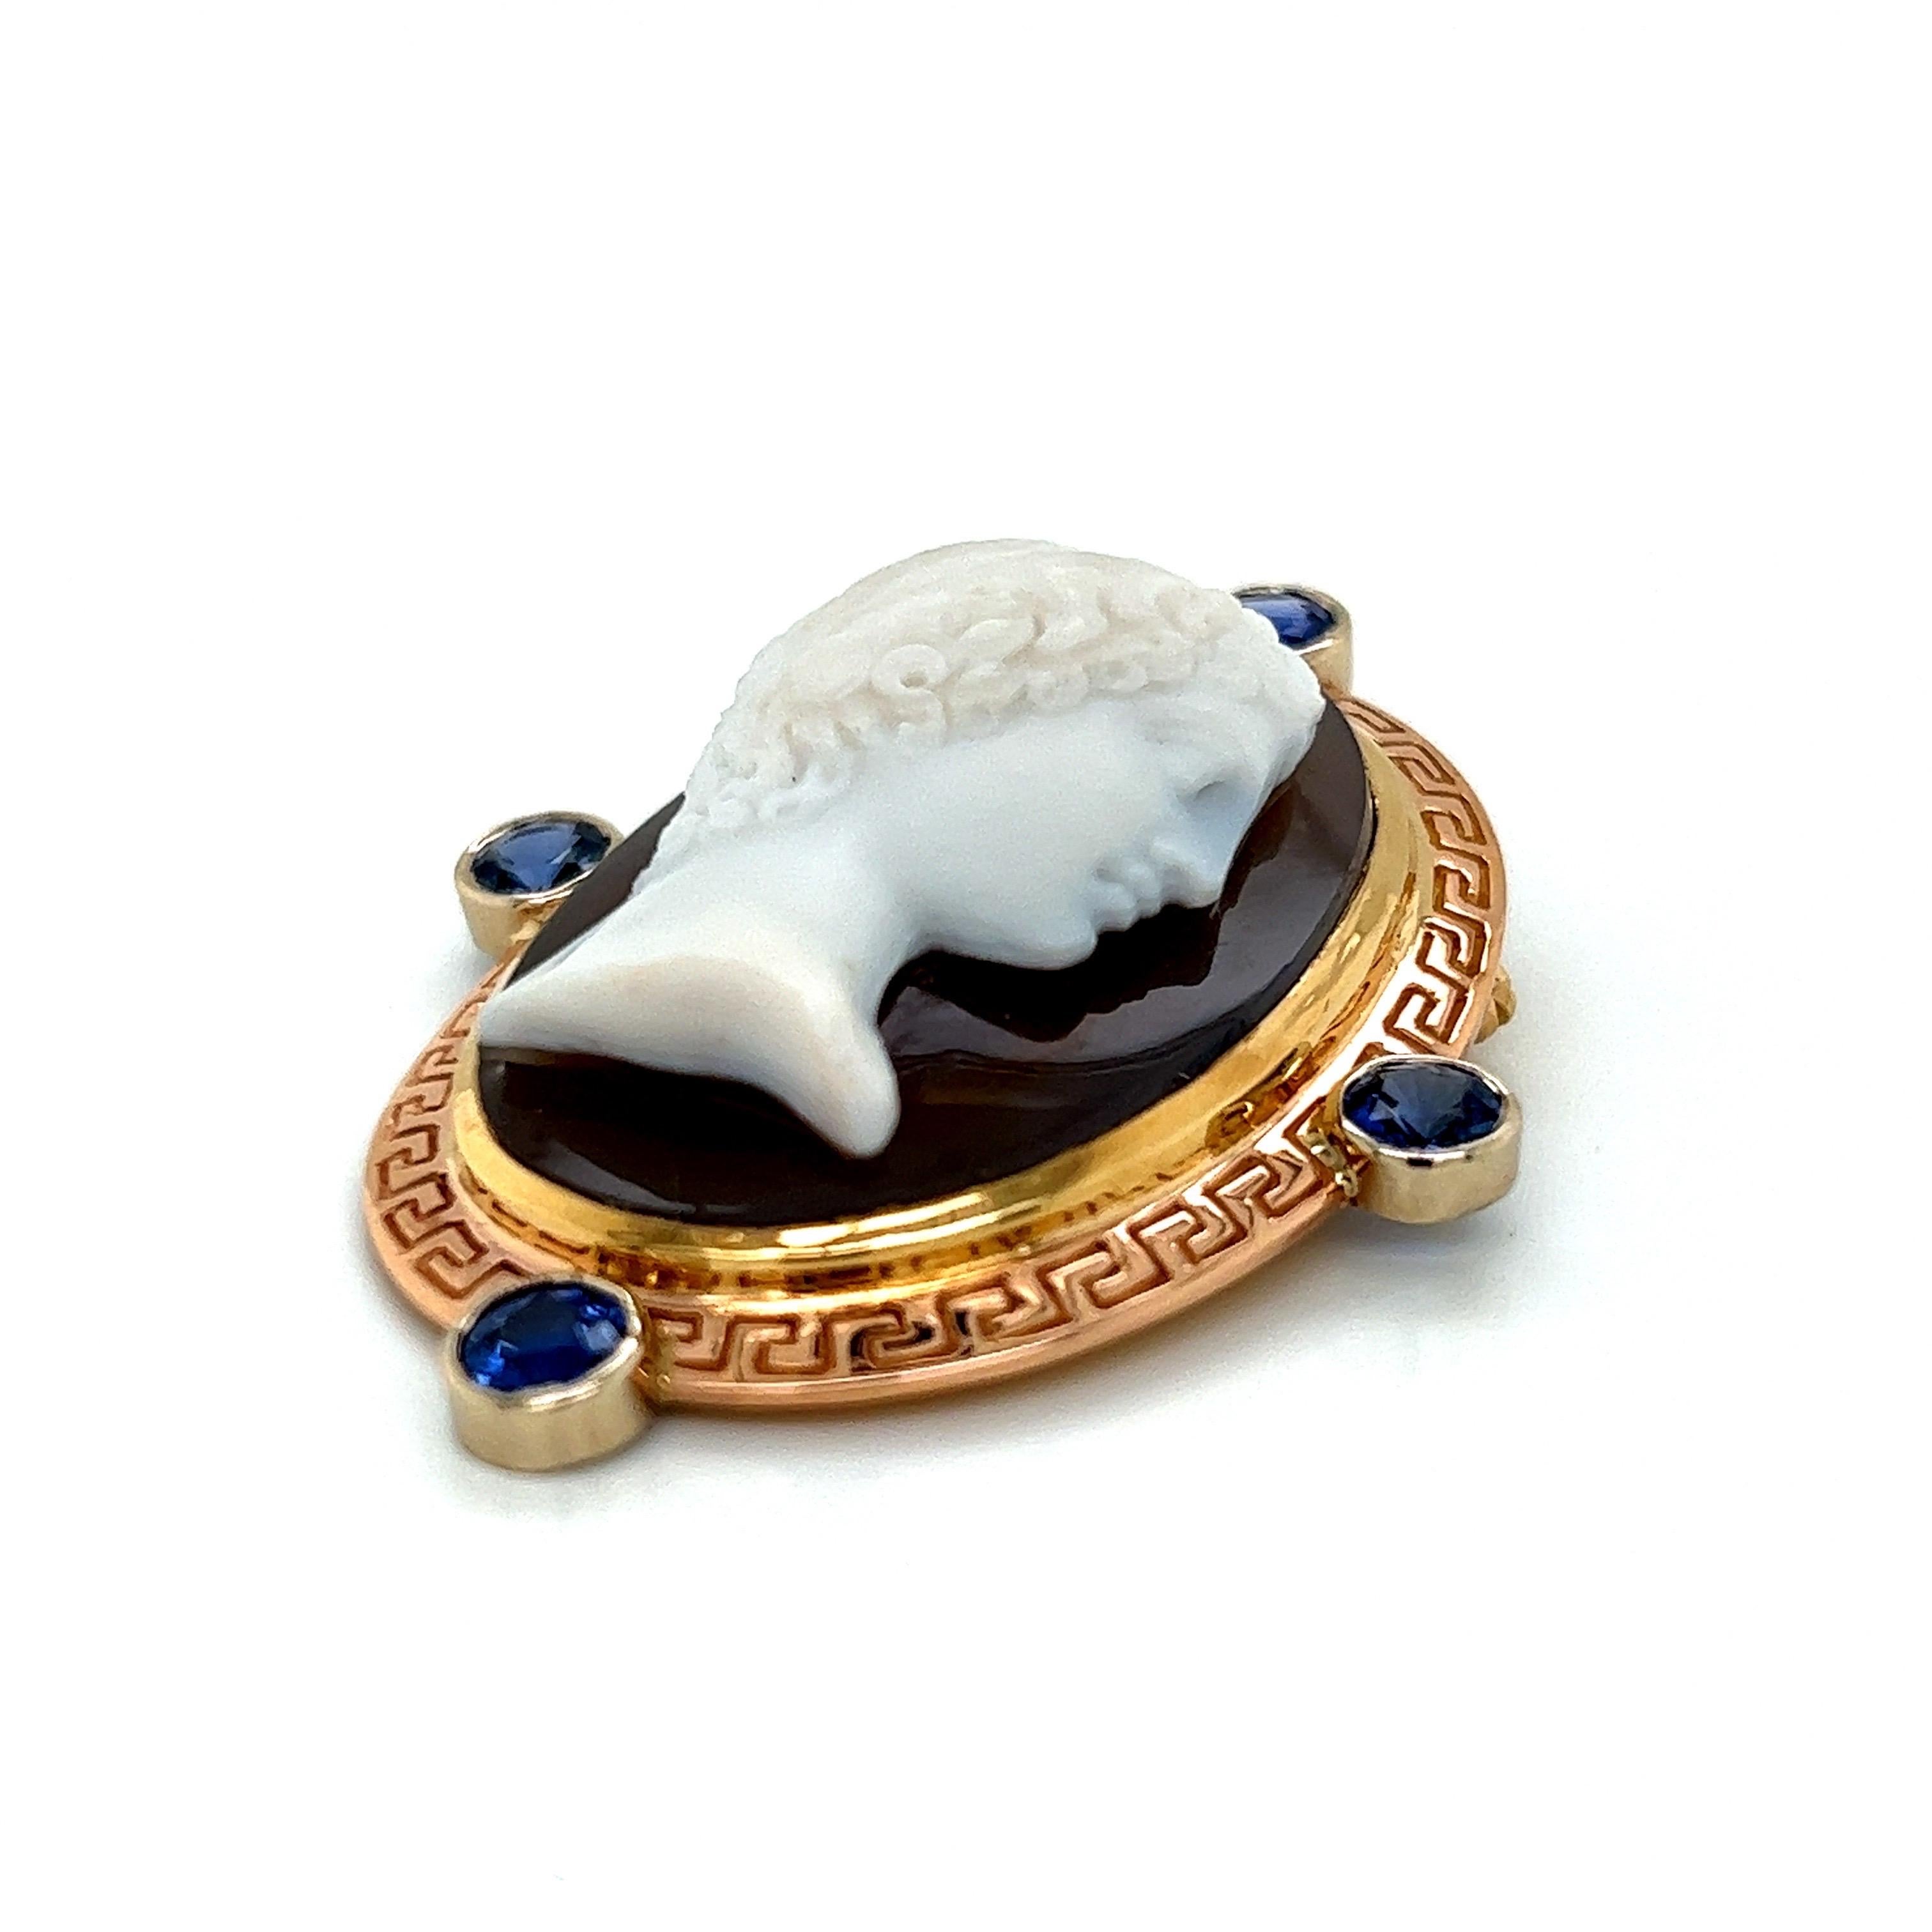 Brooch Pin with Antique Cameo of a Woman Set in 18k Yellow, White And Rose Gold Greek Key Bezel With approximately 2.5tct Of 5mm Faceted Round Blue Sapphires.

Pin measures 48.67mm x 38.62mm